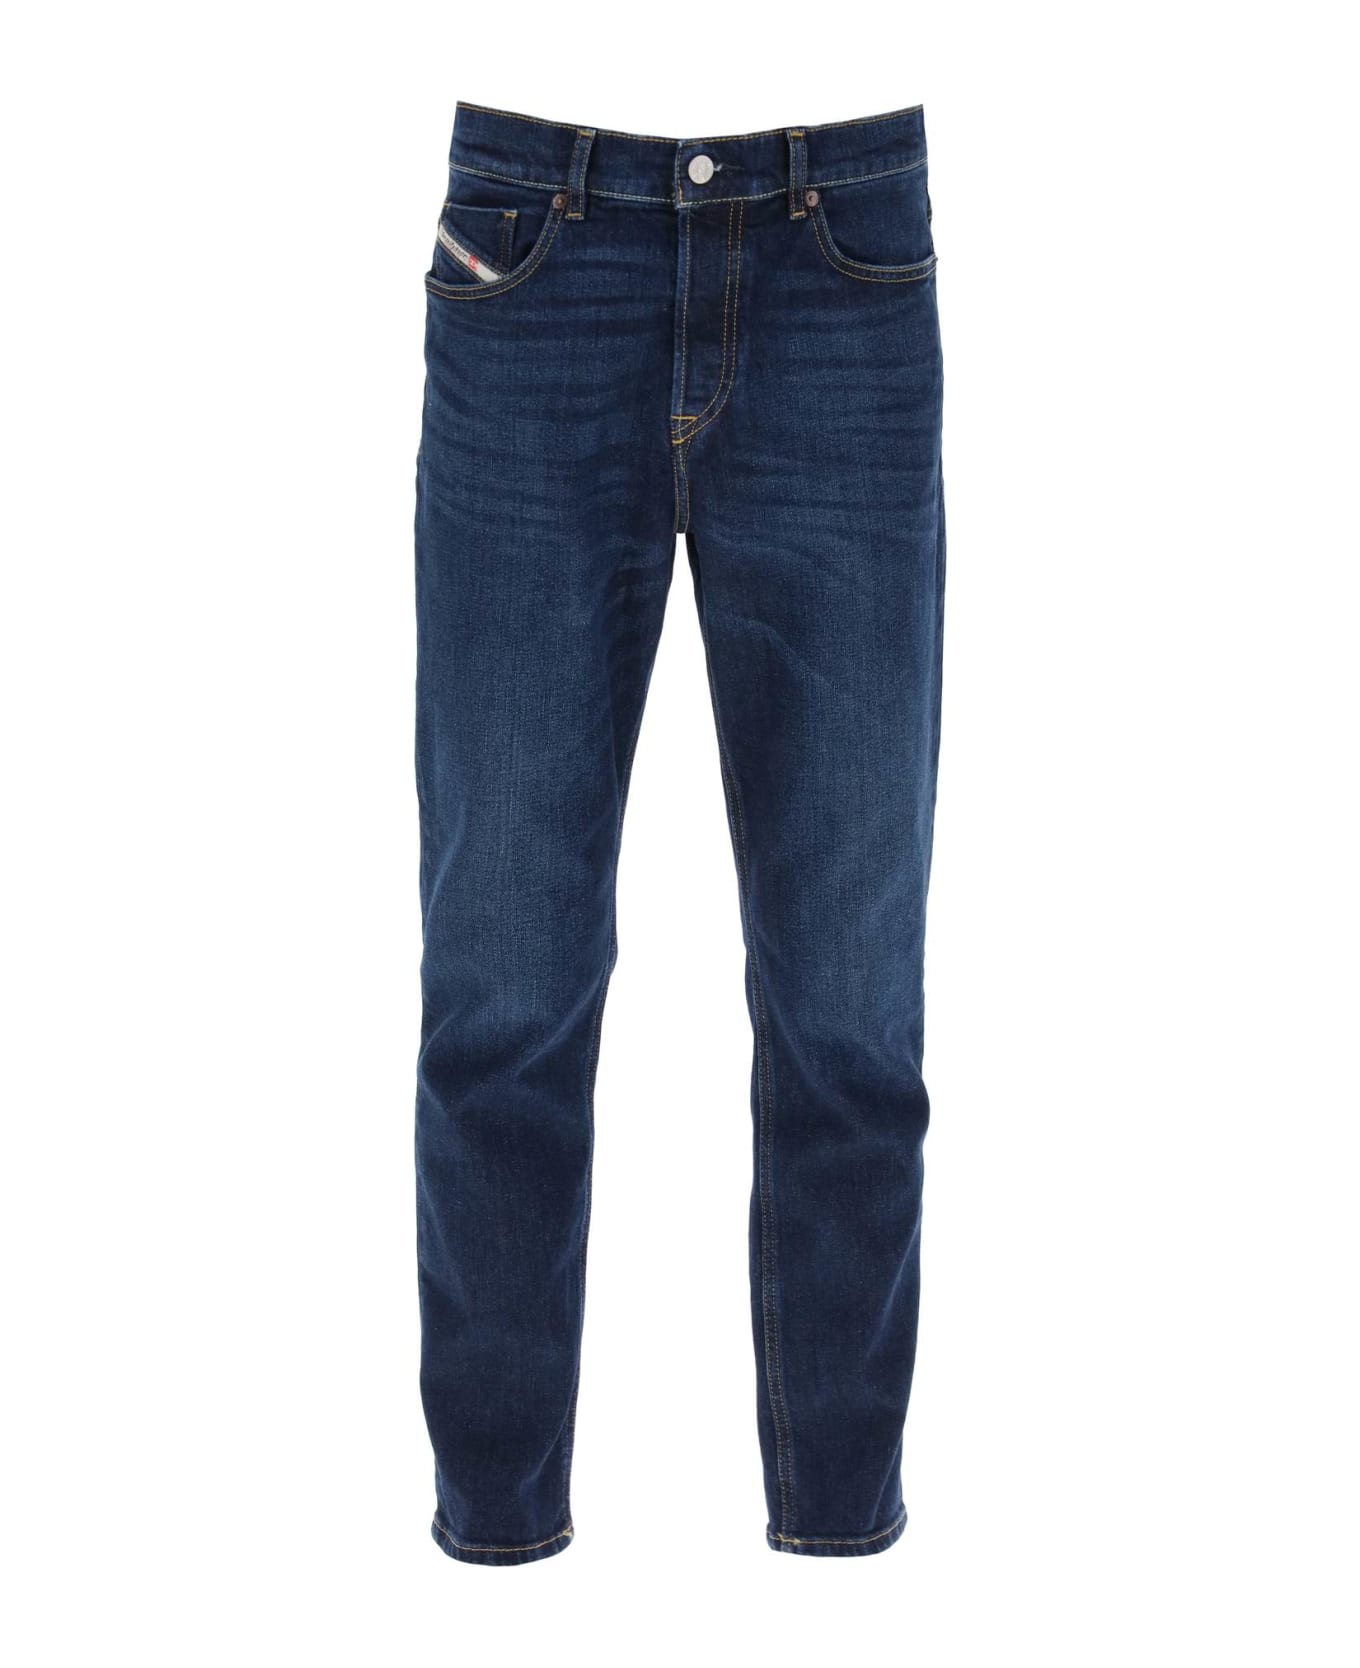 Diesel 'd-fining' Jeans With Tapered Leg - Blu scuro デニム